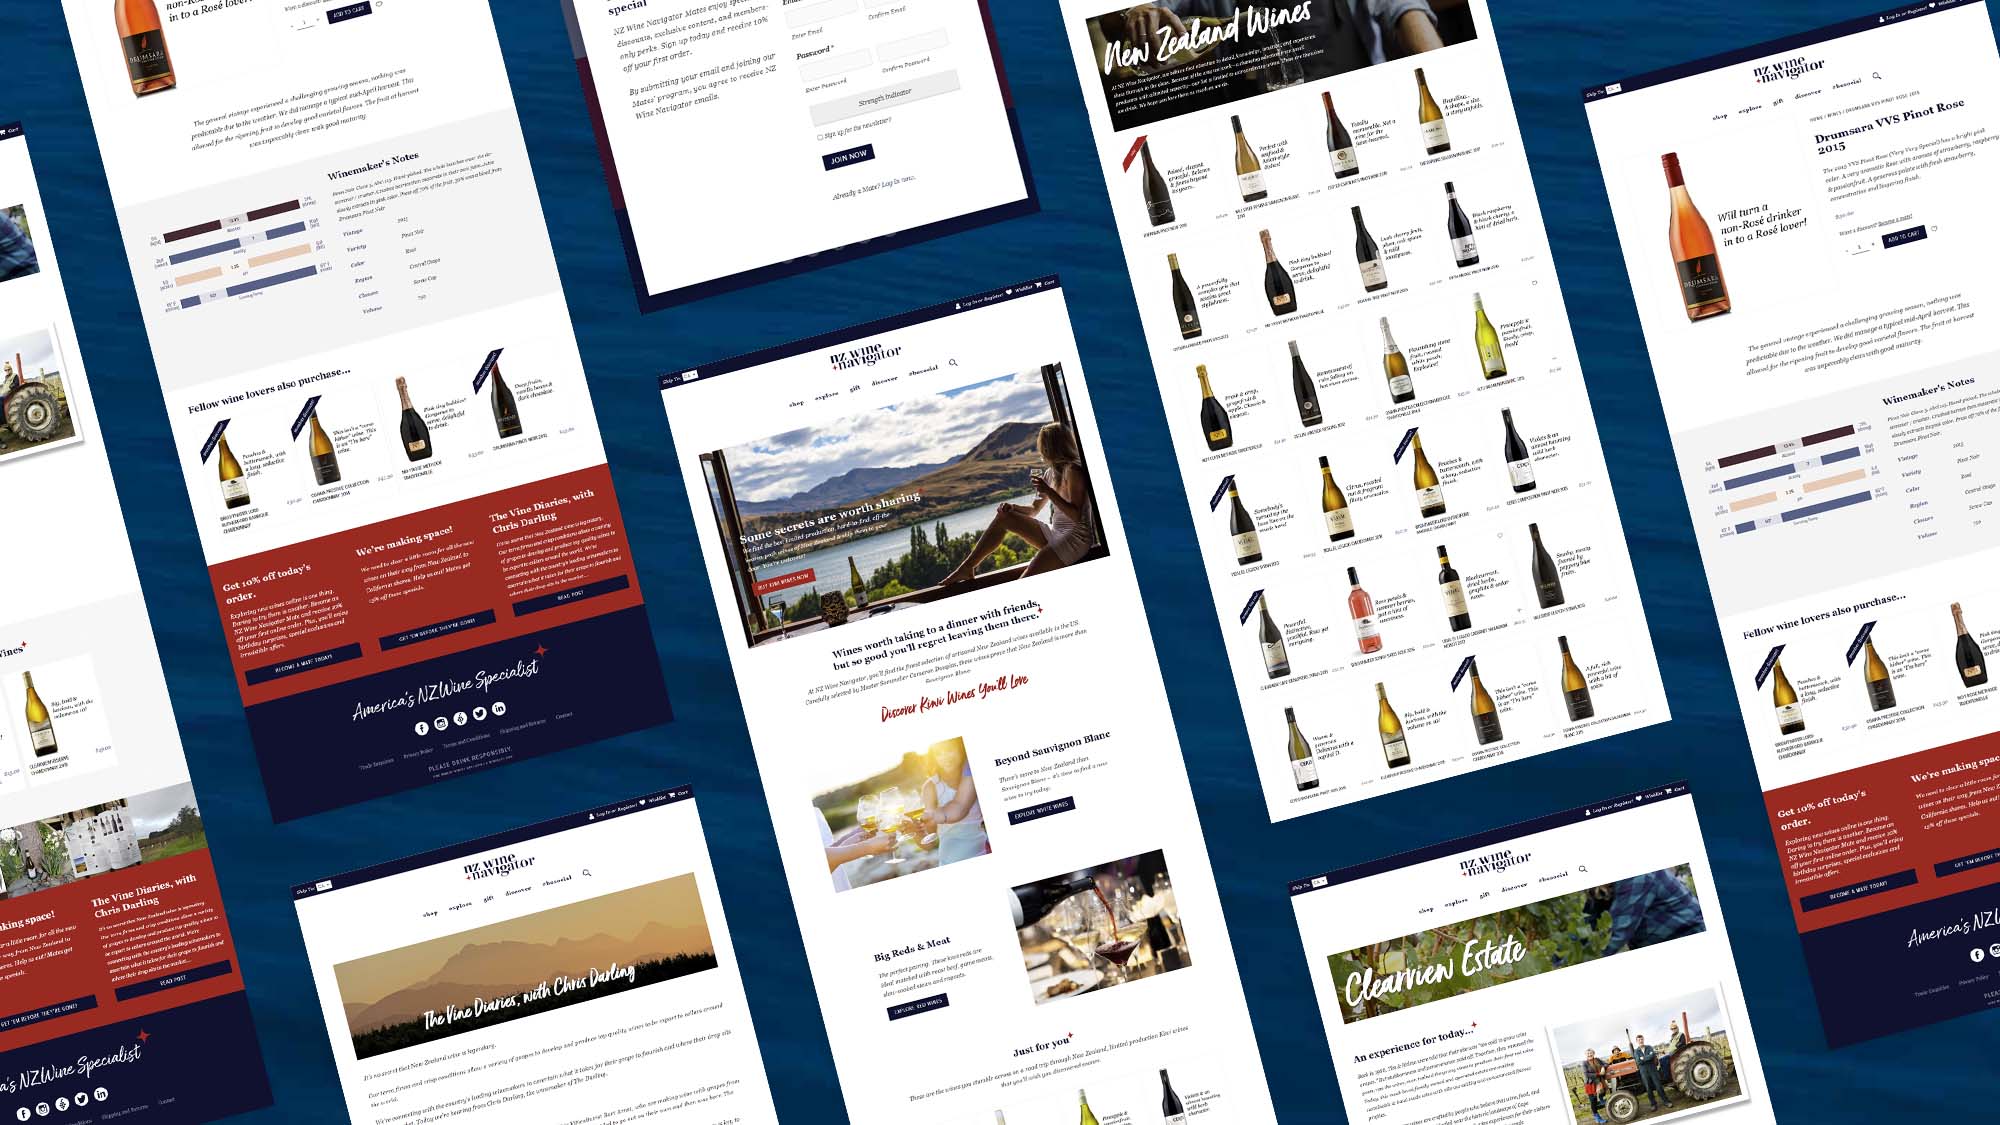 A stylized mockup of the NZ Wine Navigator website pages as designed by 5forests.